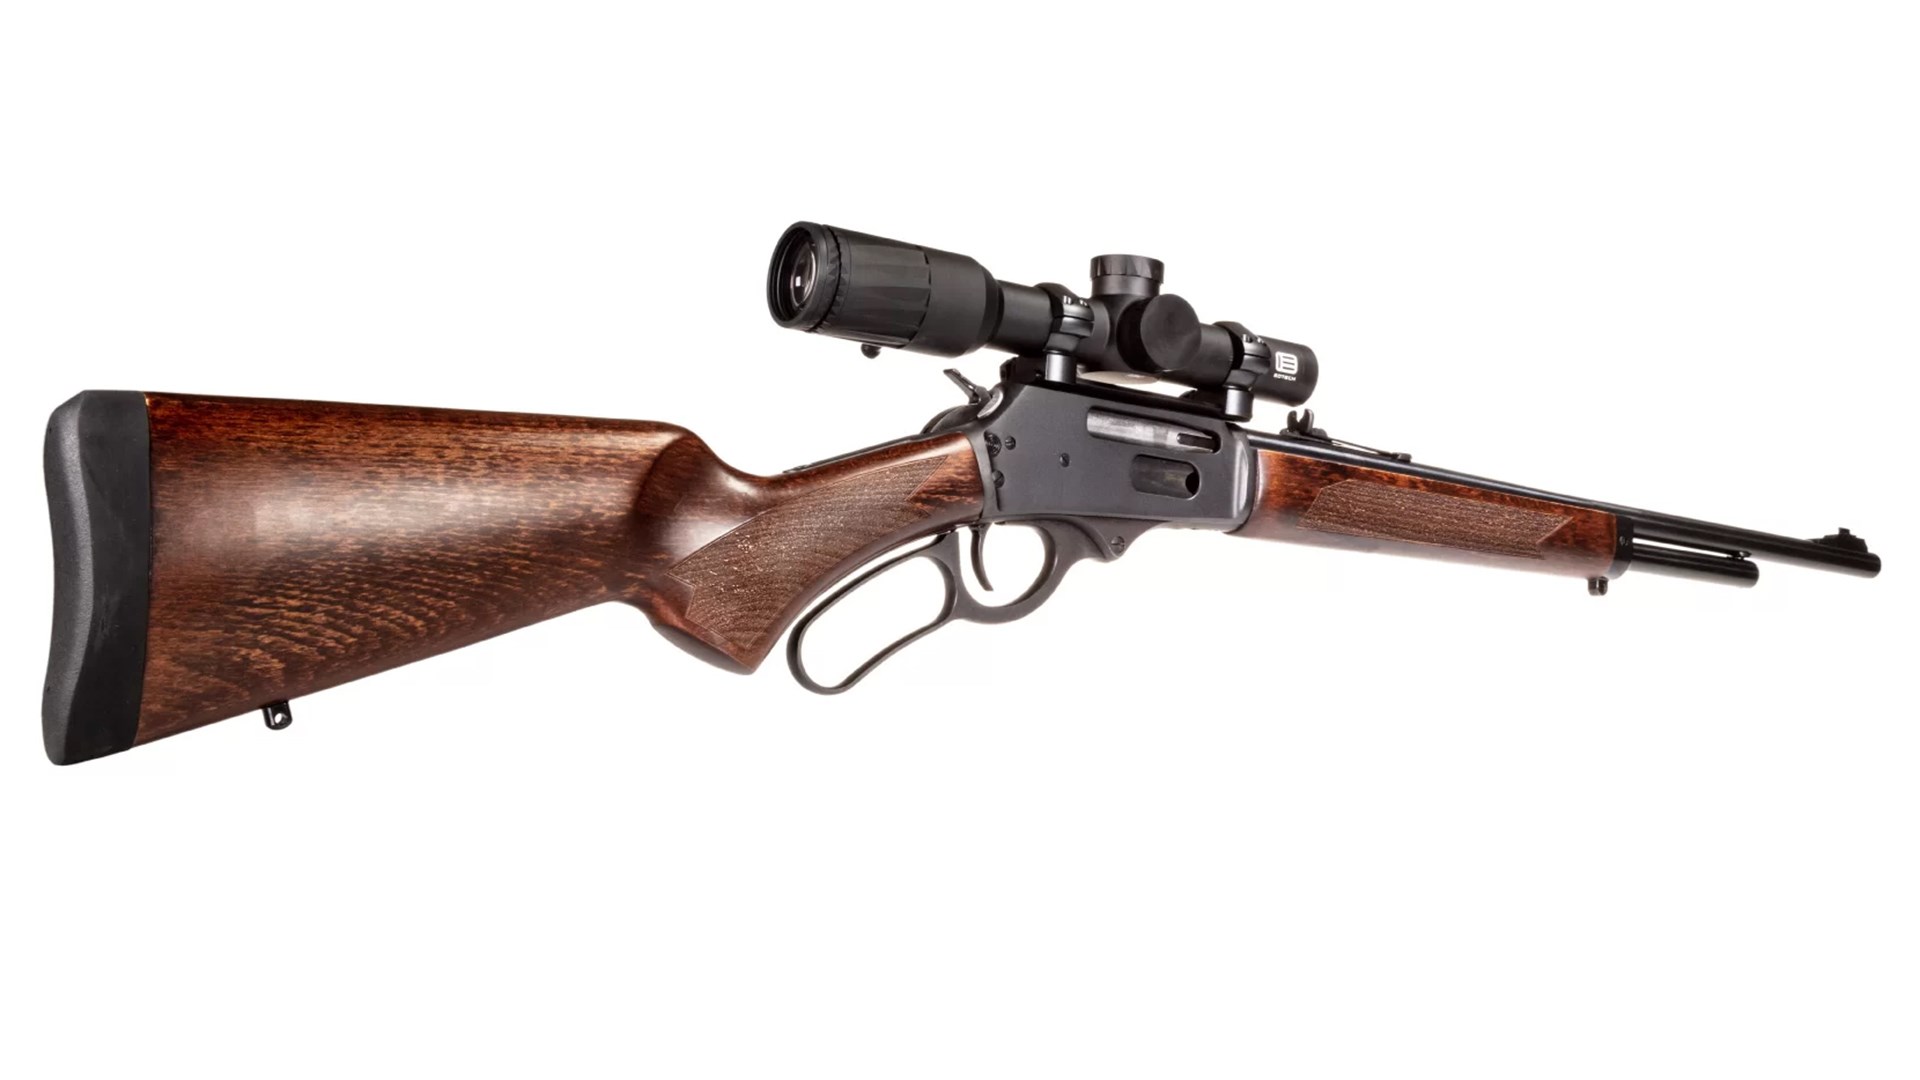 Right side of the Rossi R95 Lever-Action shown with a mounted scope.